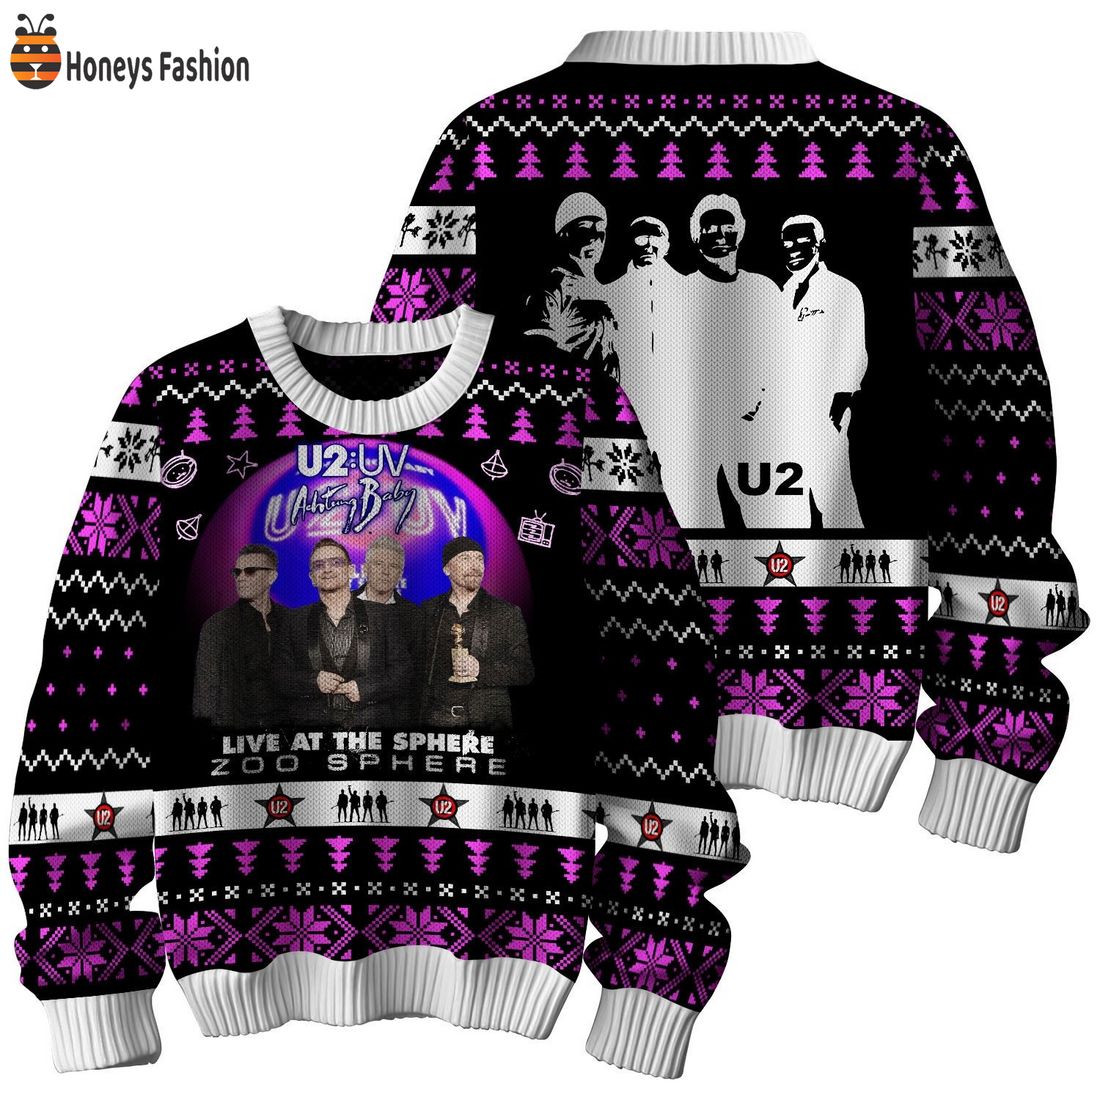 U2:UV Achtung Baby Live at Sphere in Paradise Ugly Christmas Sweater